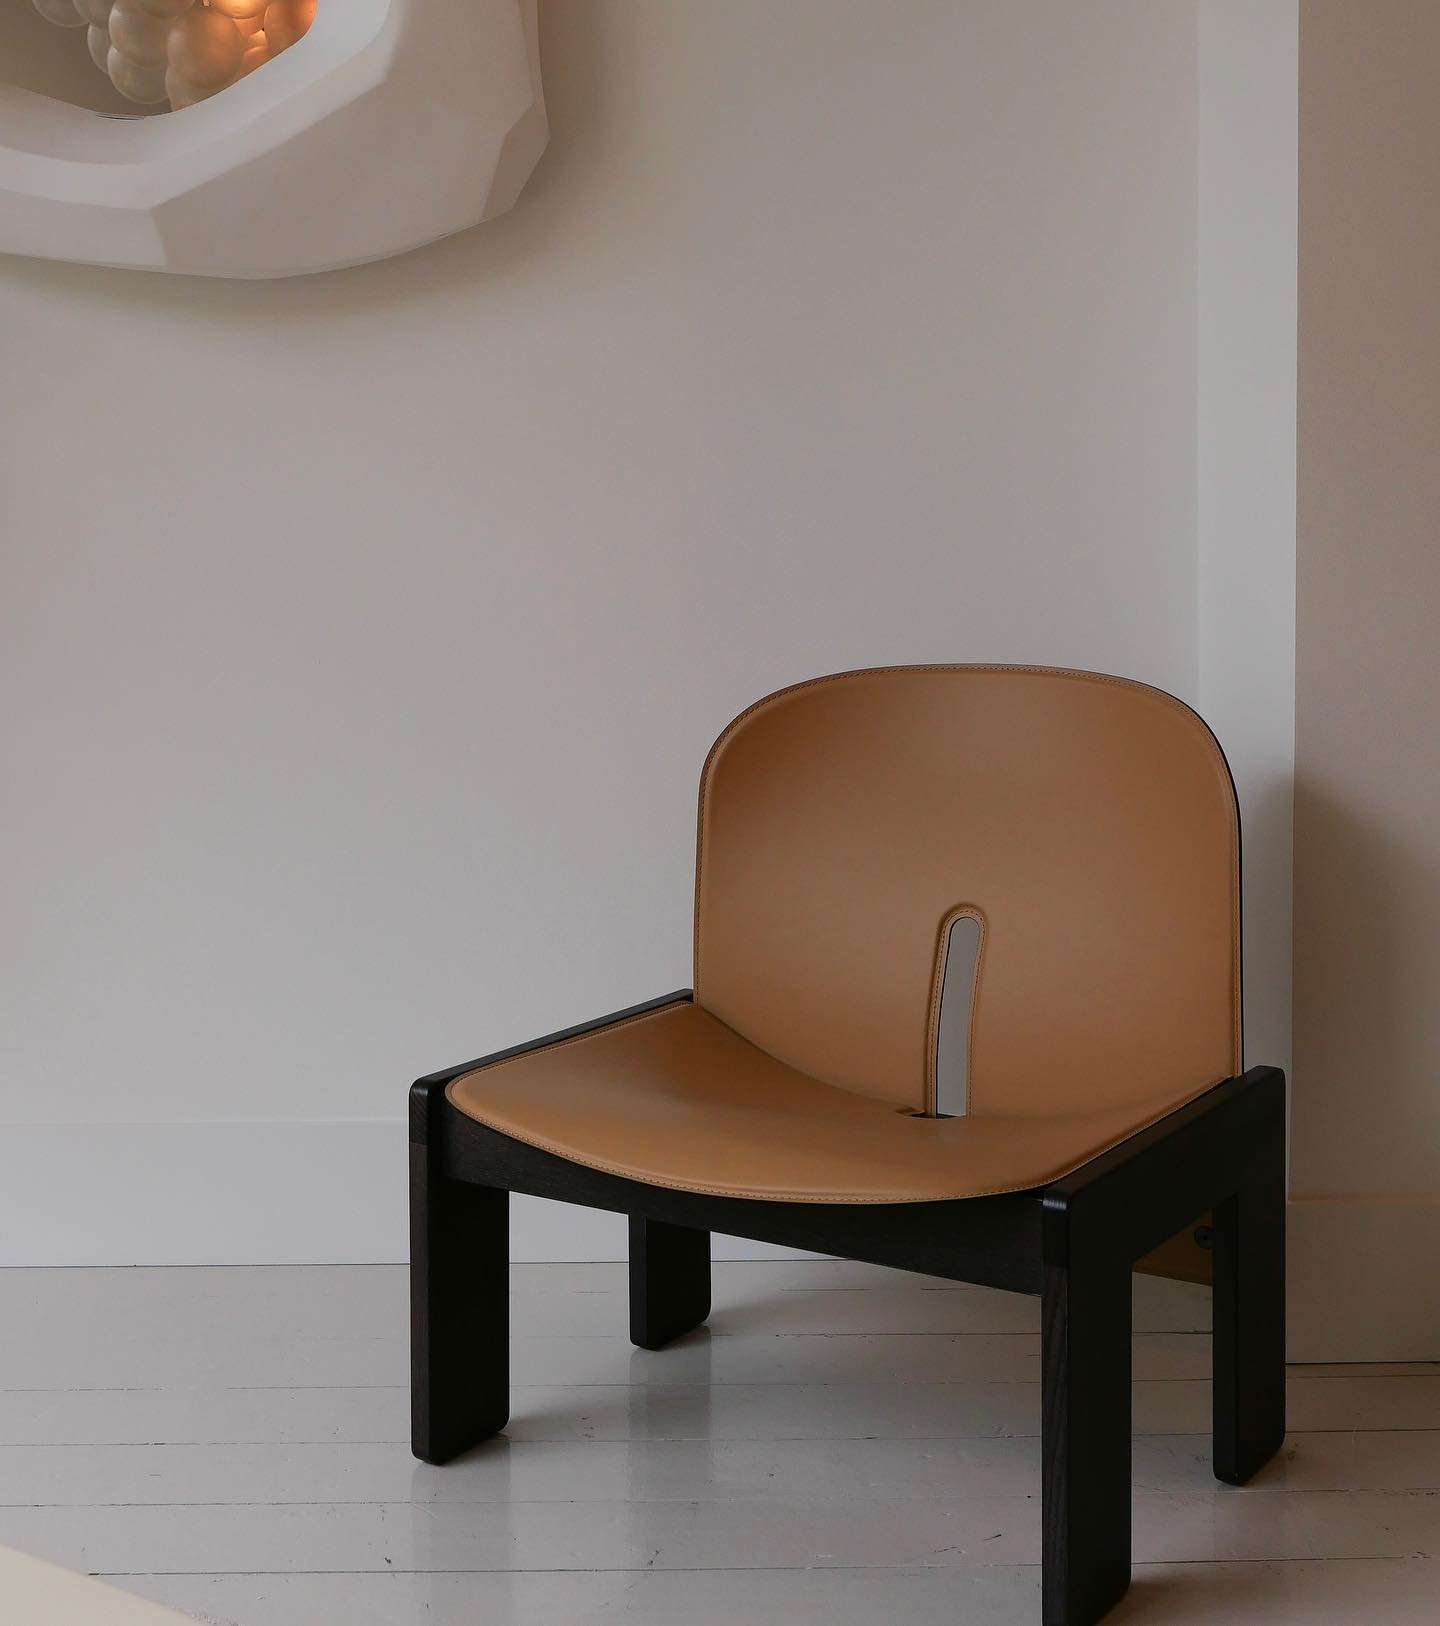 Mobilia&rsquo;s chair of the month: the iconic 925 Scarpa lounge chair. It was designed in 1965 alongside the charming 121 Scarpa dining chair by Afra and Tobias Scarpa. Easily recognized by its robust wooden frame and the striking contrast with its 